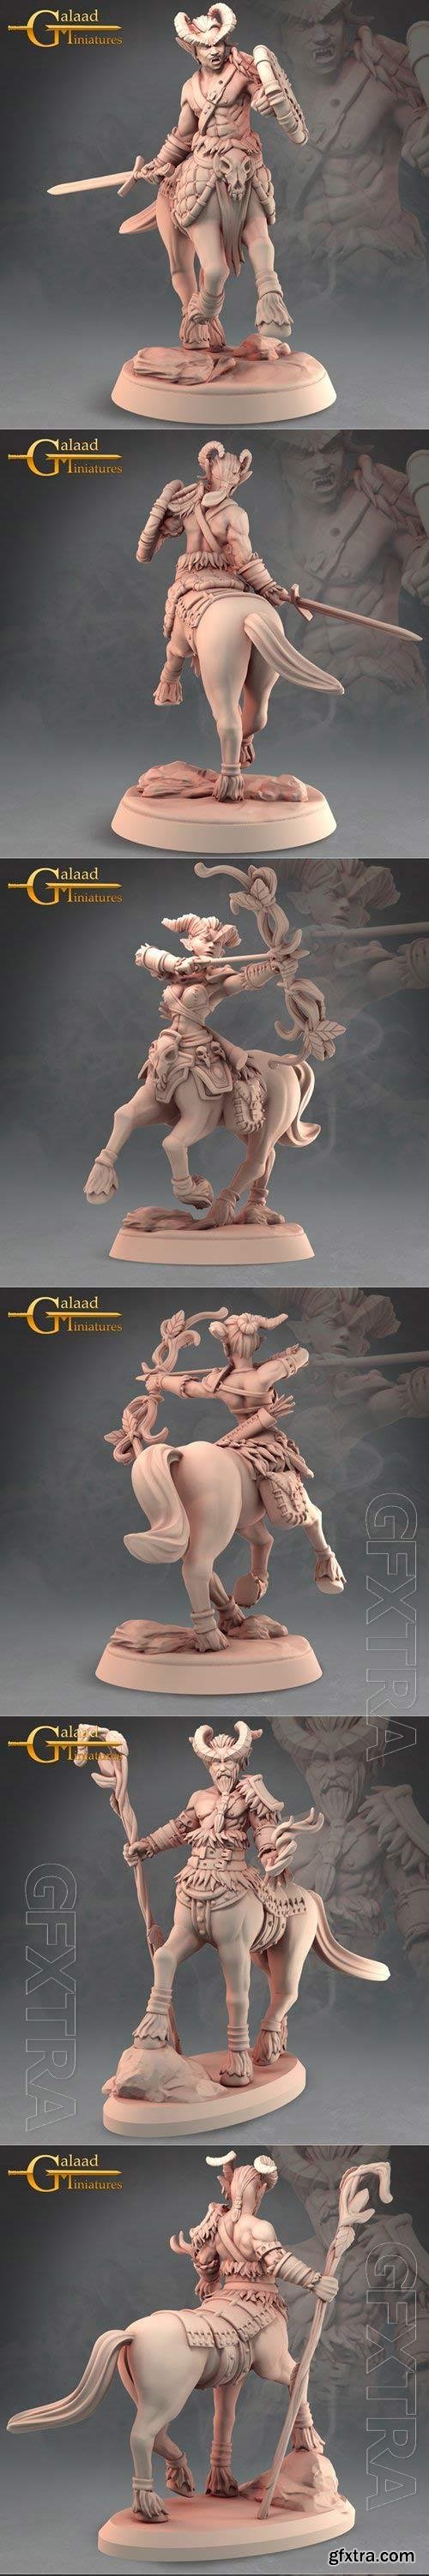 Into The Woods - Centaurs 3D Print